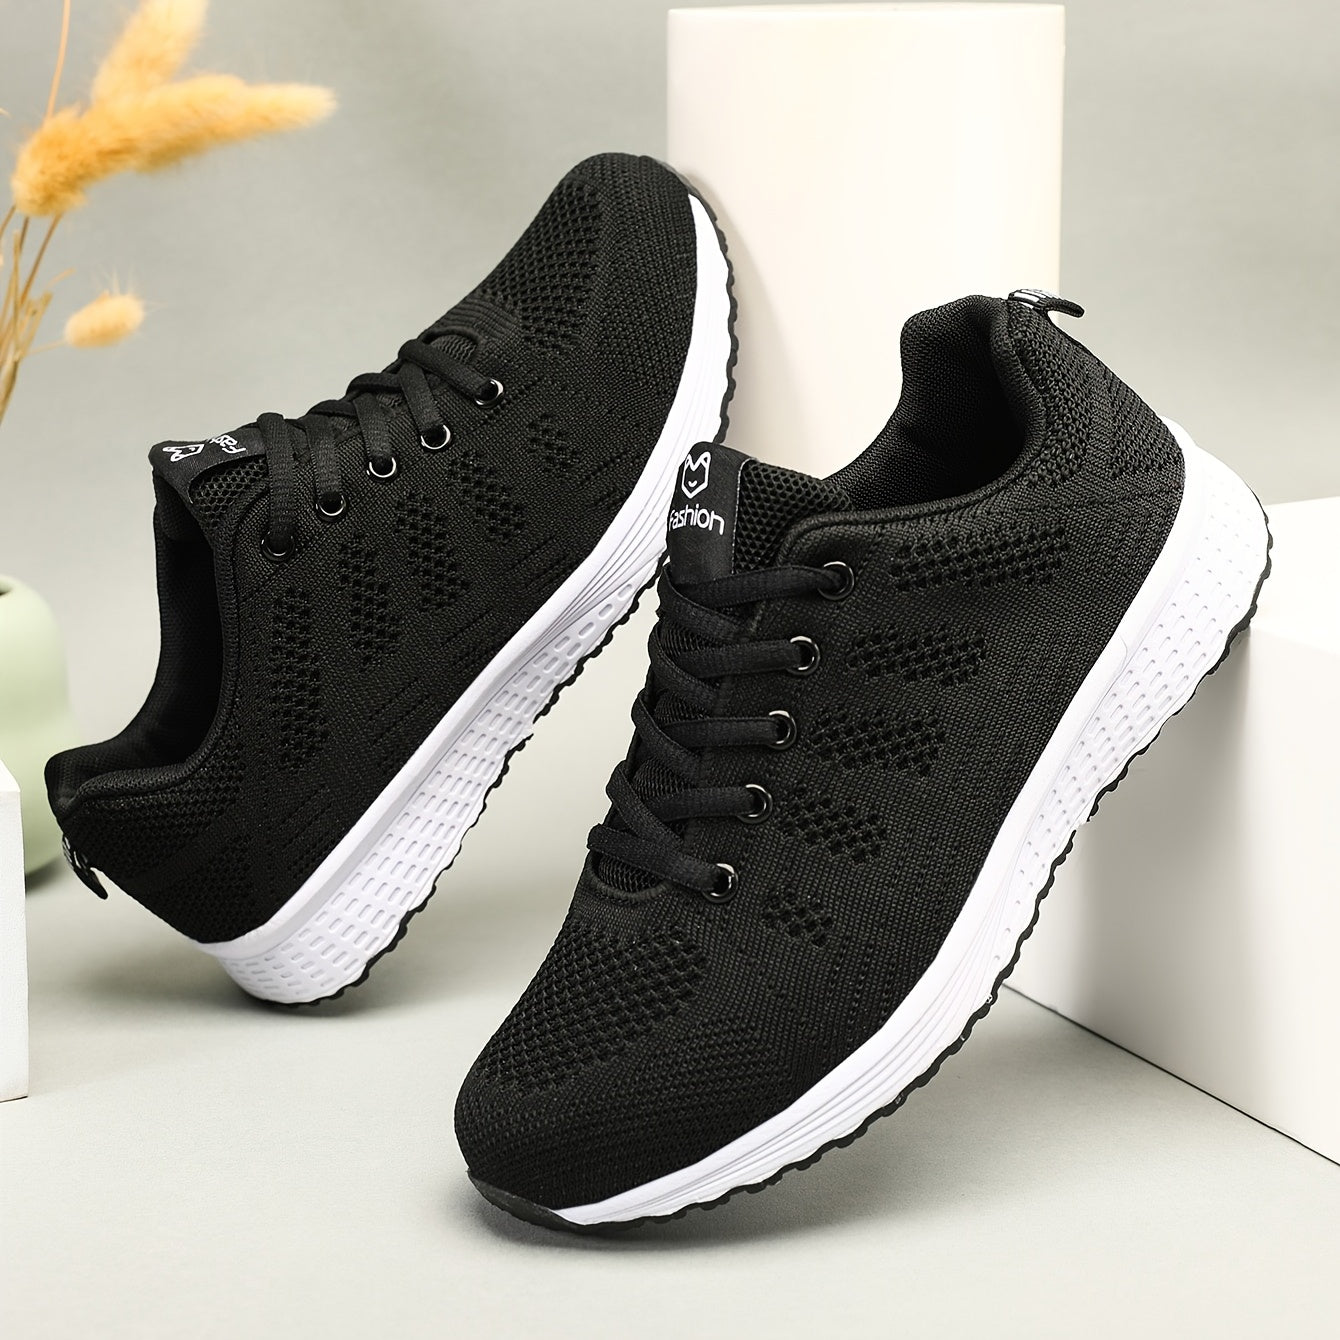 「lovevop」Women's Leisure Knit Sneakers, Lightweight Low Top Lace Up Solid Color Casual Shoes, Women's Running Shoes